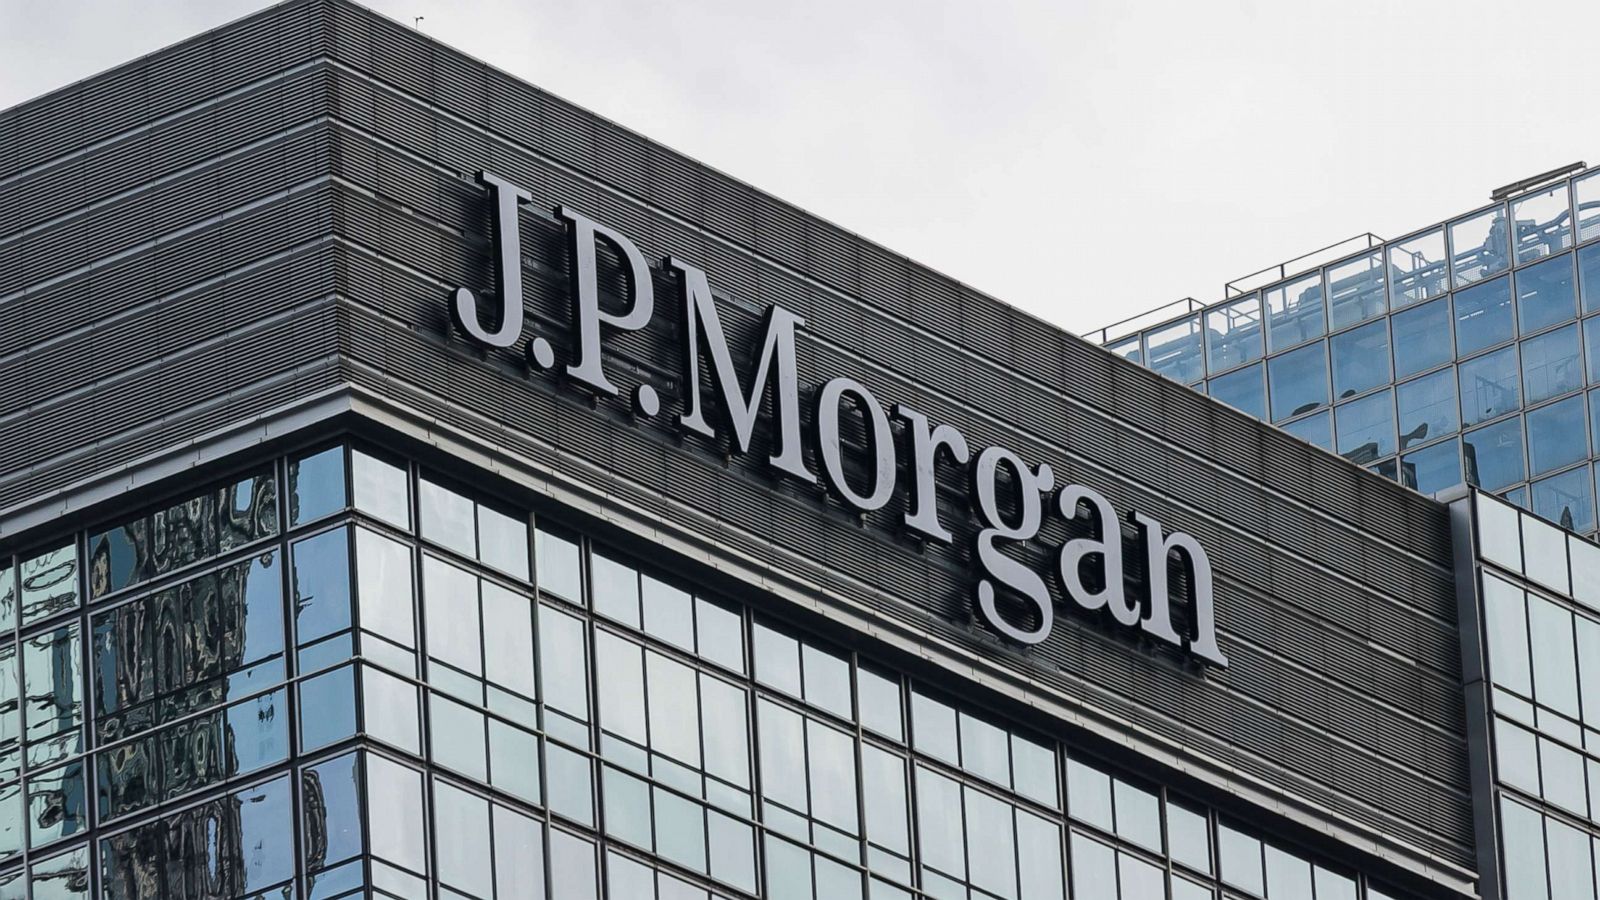 JPMorgan’s JPM Coin Shatters Records with $1 Billion in Daily Transactions – Can it keep pace with Ripple (XRP)?